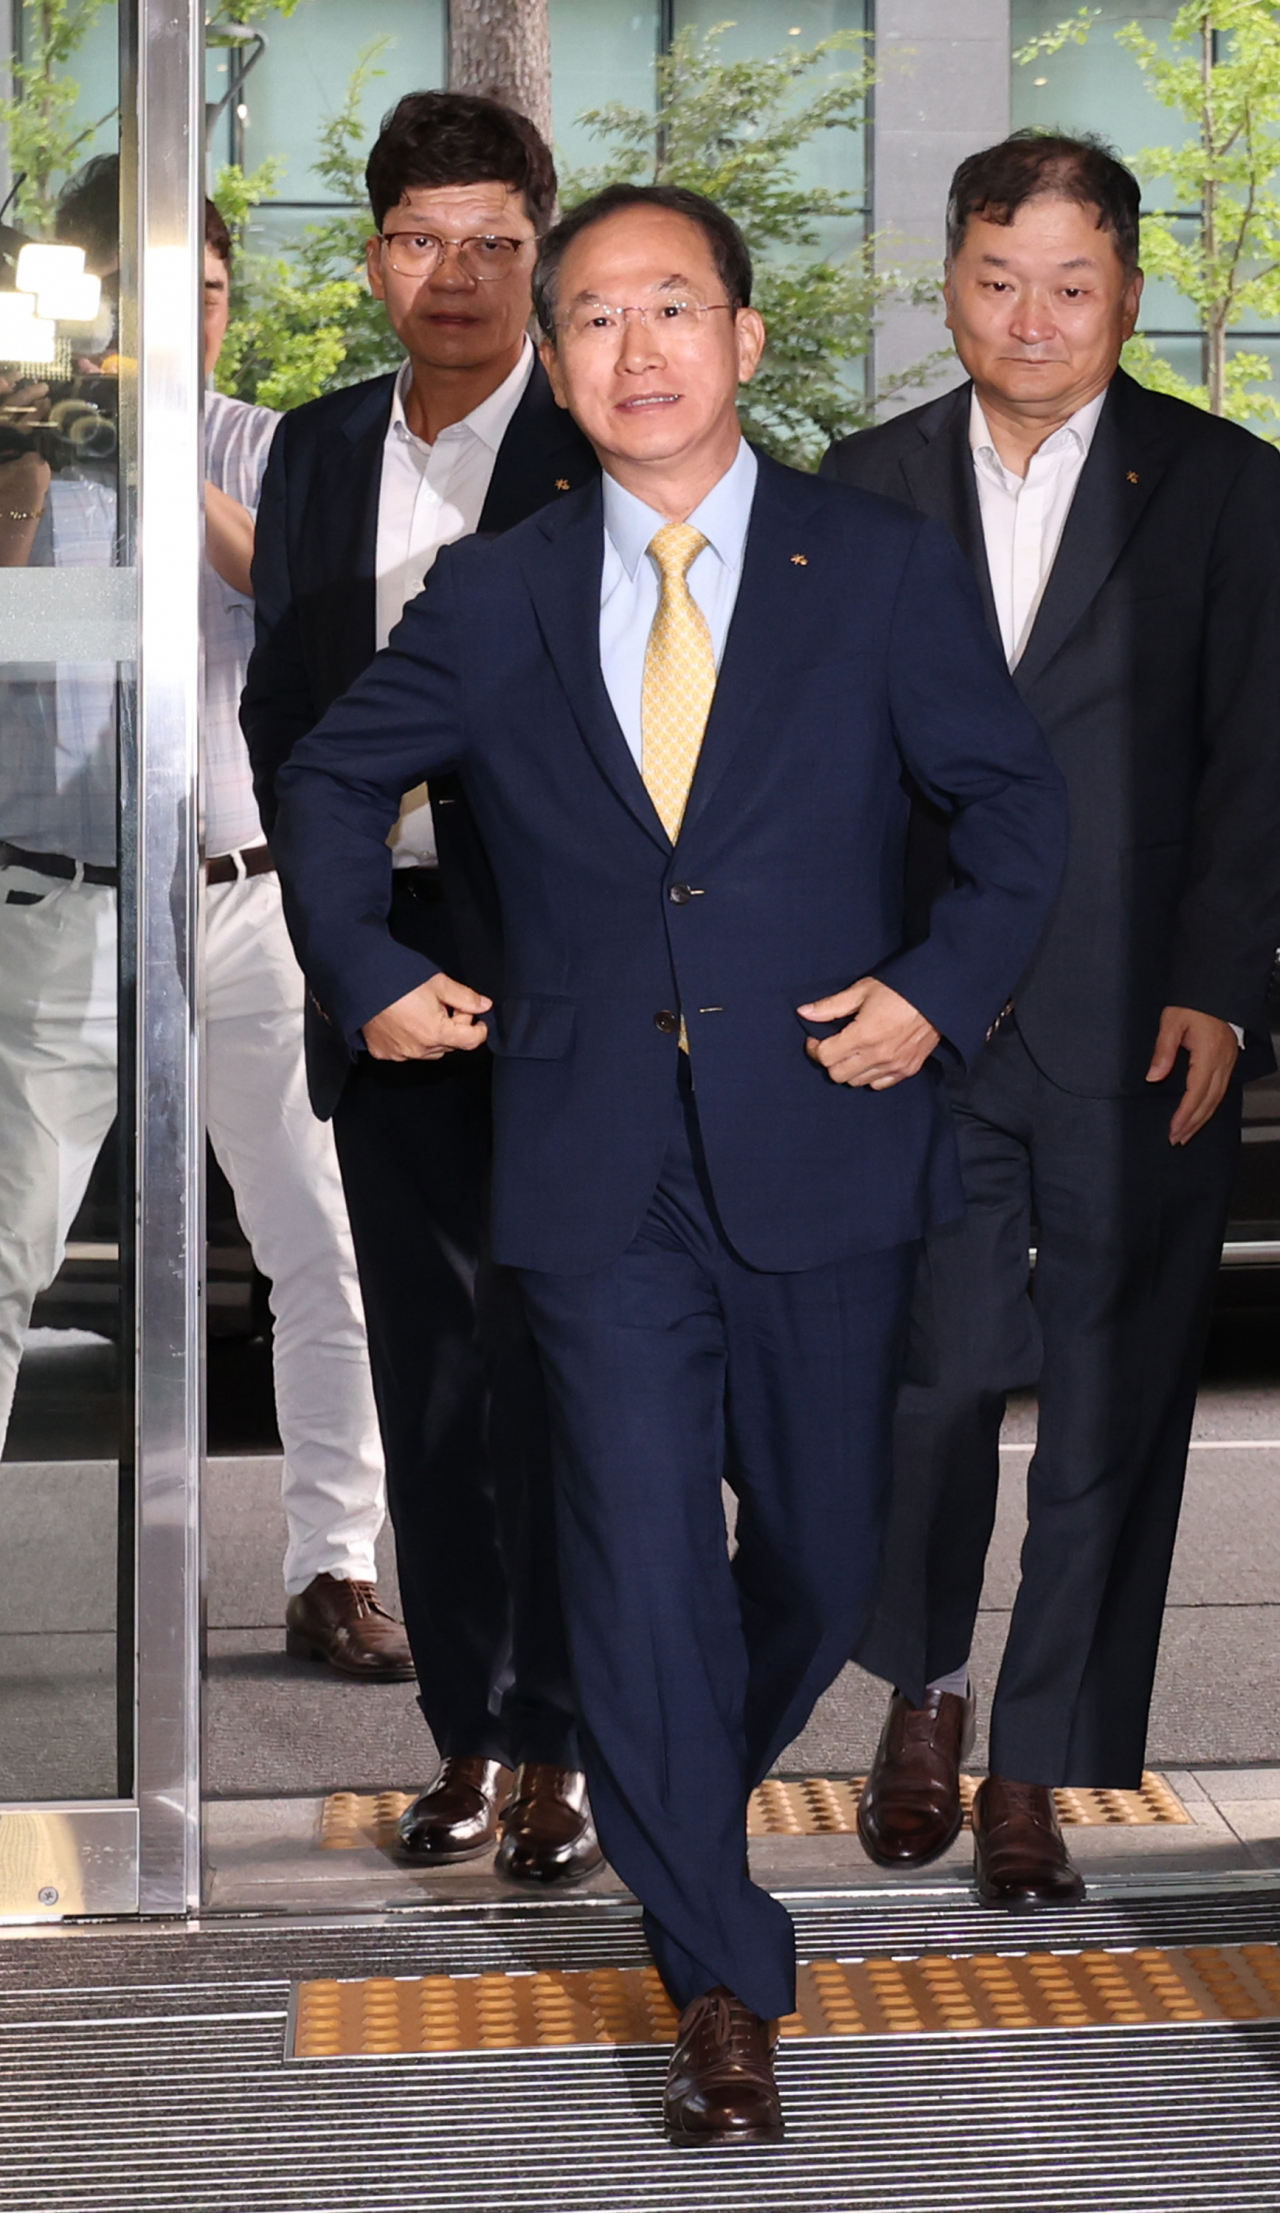 Yang Jong-hee, the vice chairman and candidate for the next chairman of KB Financial Group, a prominent South Korean banking conglomerate, arrives at the group's headquarters in Seoul on Monday. (Yonhap)